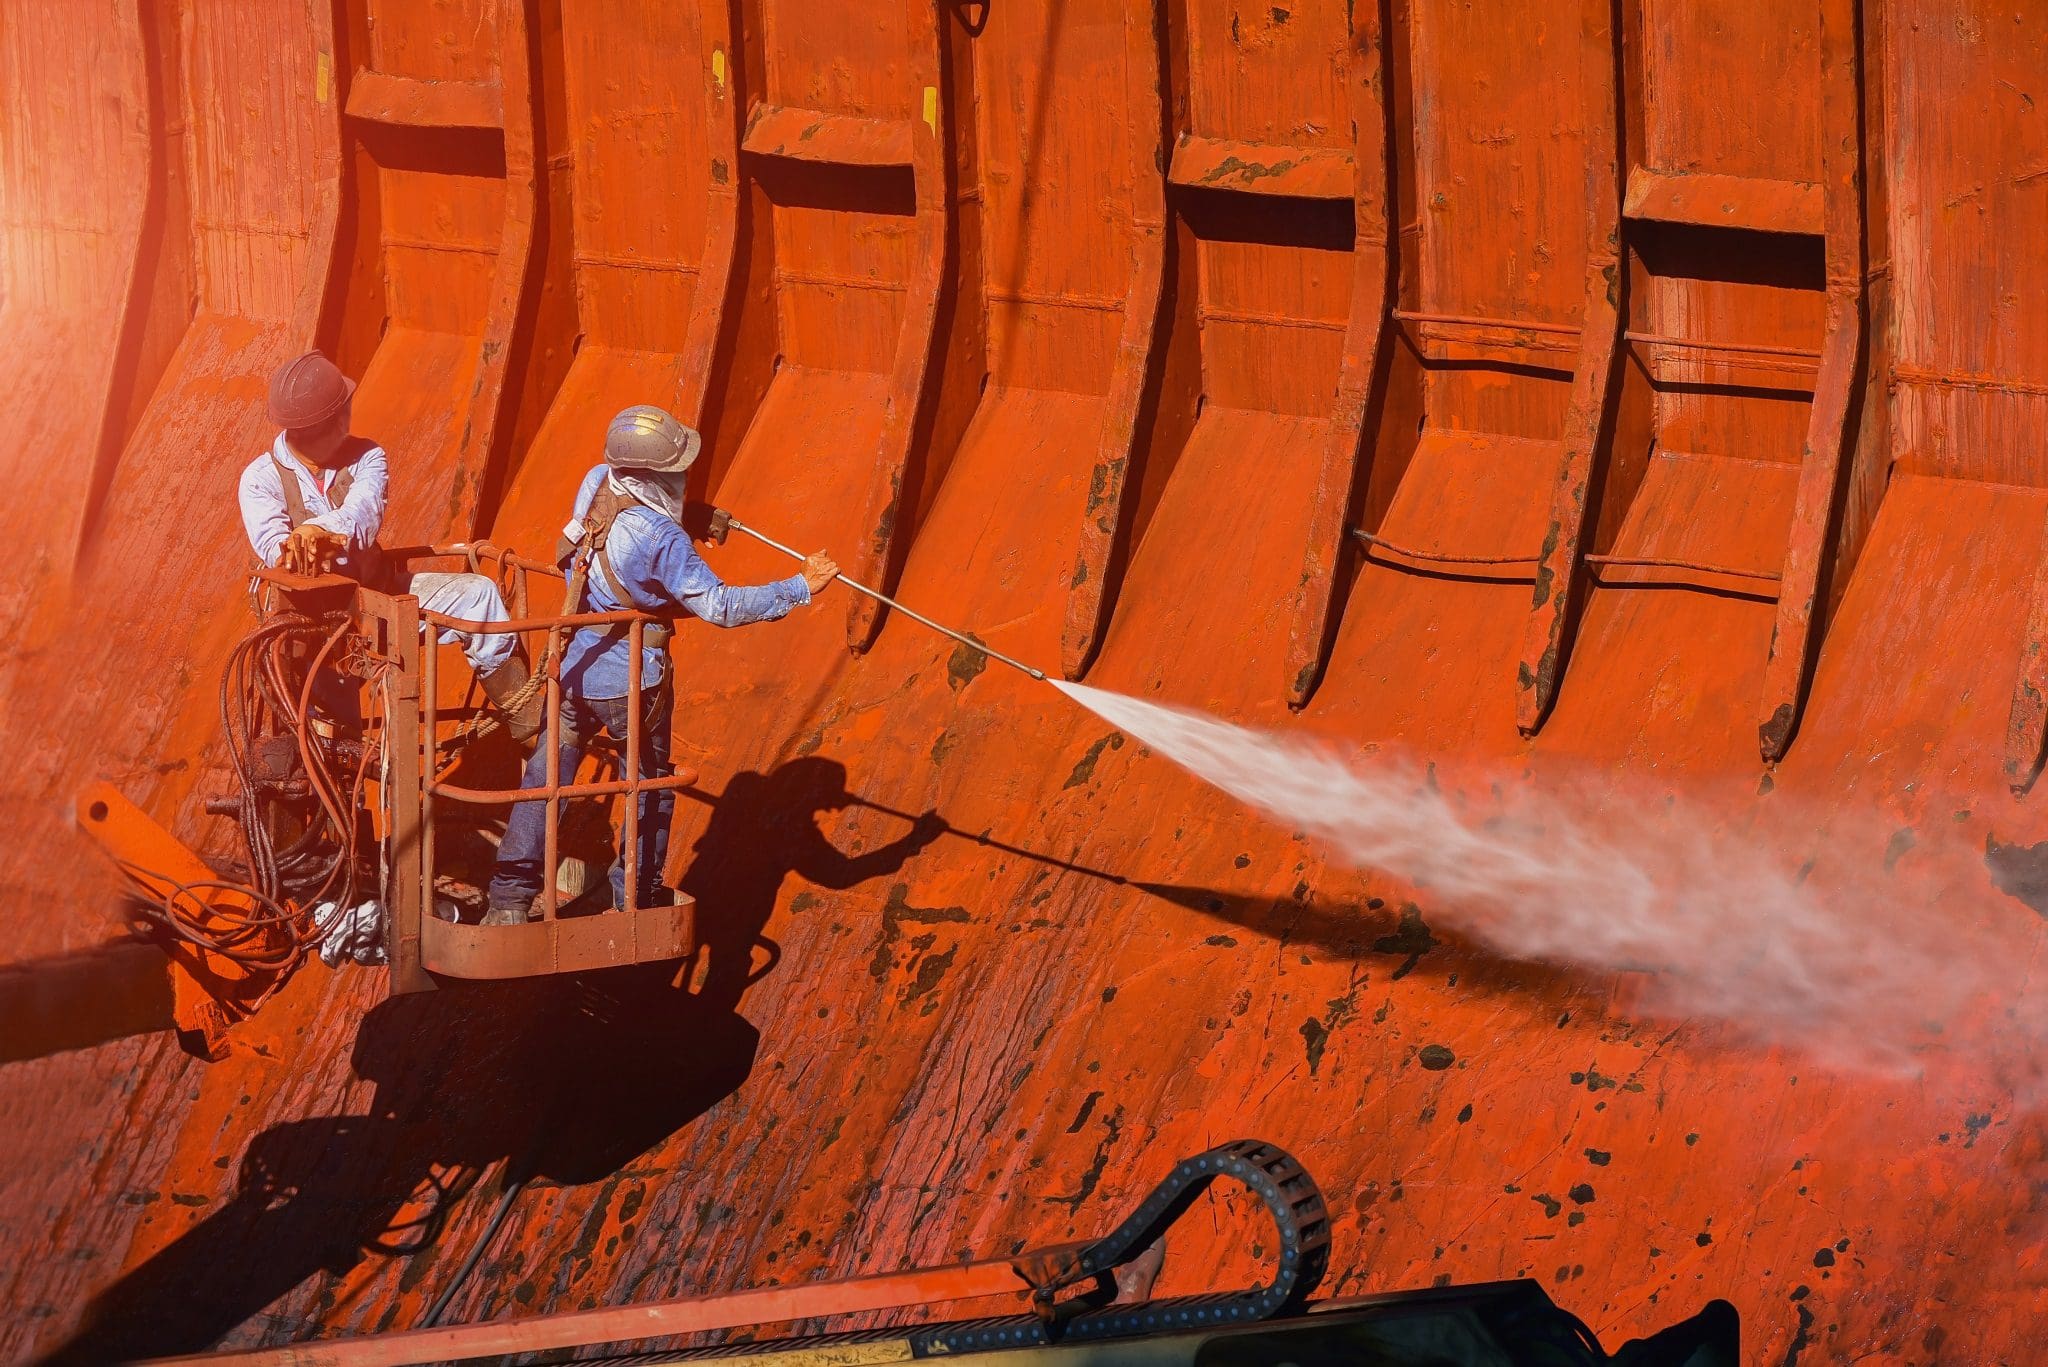 Washing and cleaning, worker High pressure water jet to cleaning with Old ship washing on Trucks have sherry piker wearing safety harness with ppe in side cargo hold under ship repair in floating dry dock in shipyard. Preparing surface for corrosion resistant coating application